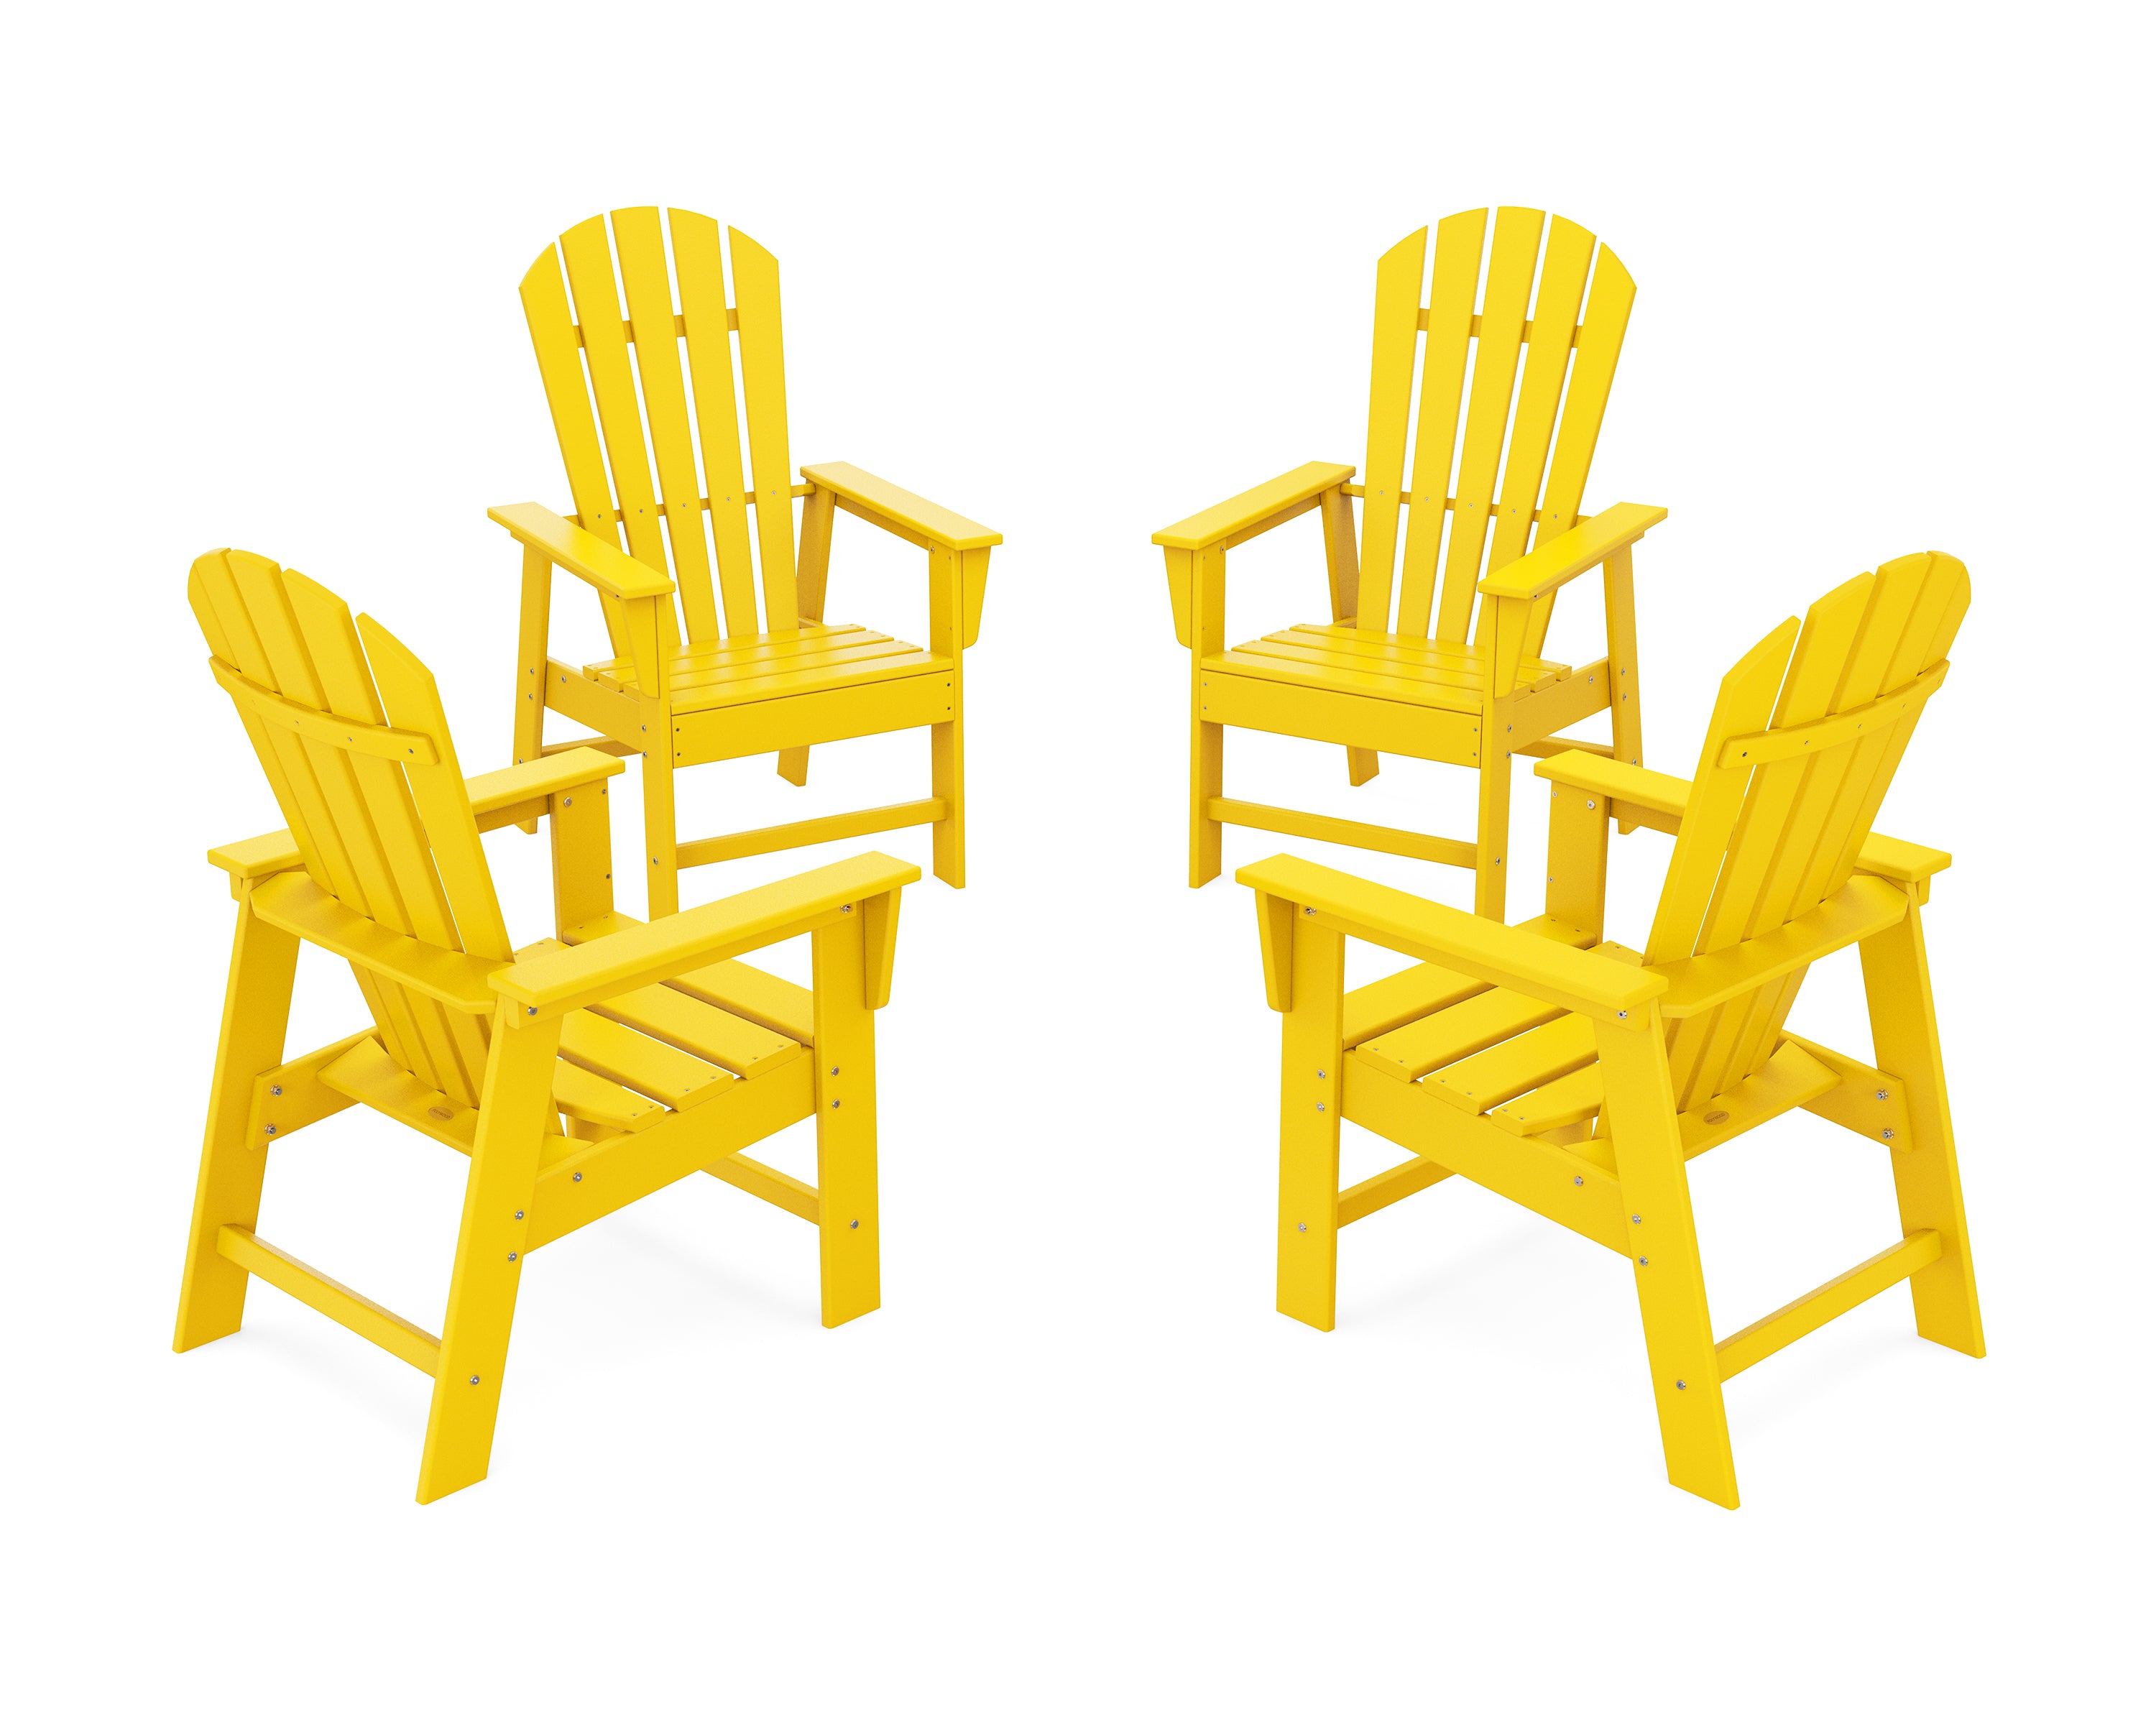 POLYWOOD® 4-Piece South Beach Casual Chair Conversation Set in Lemon